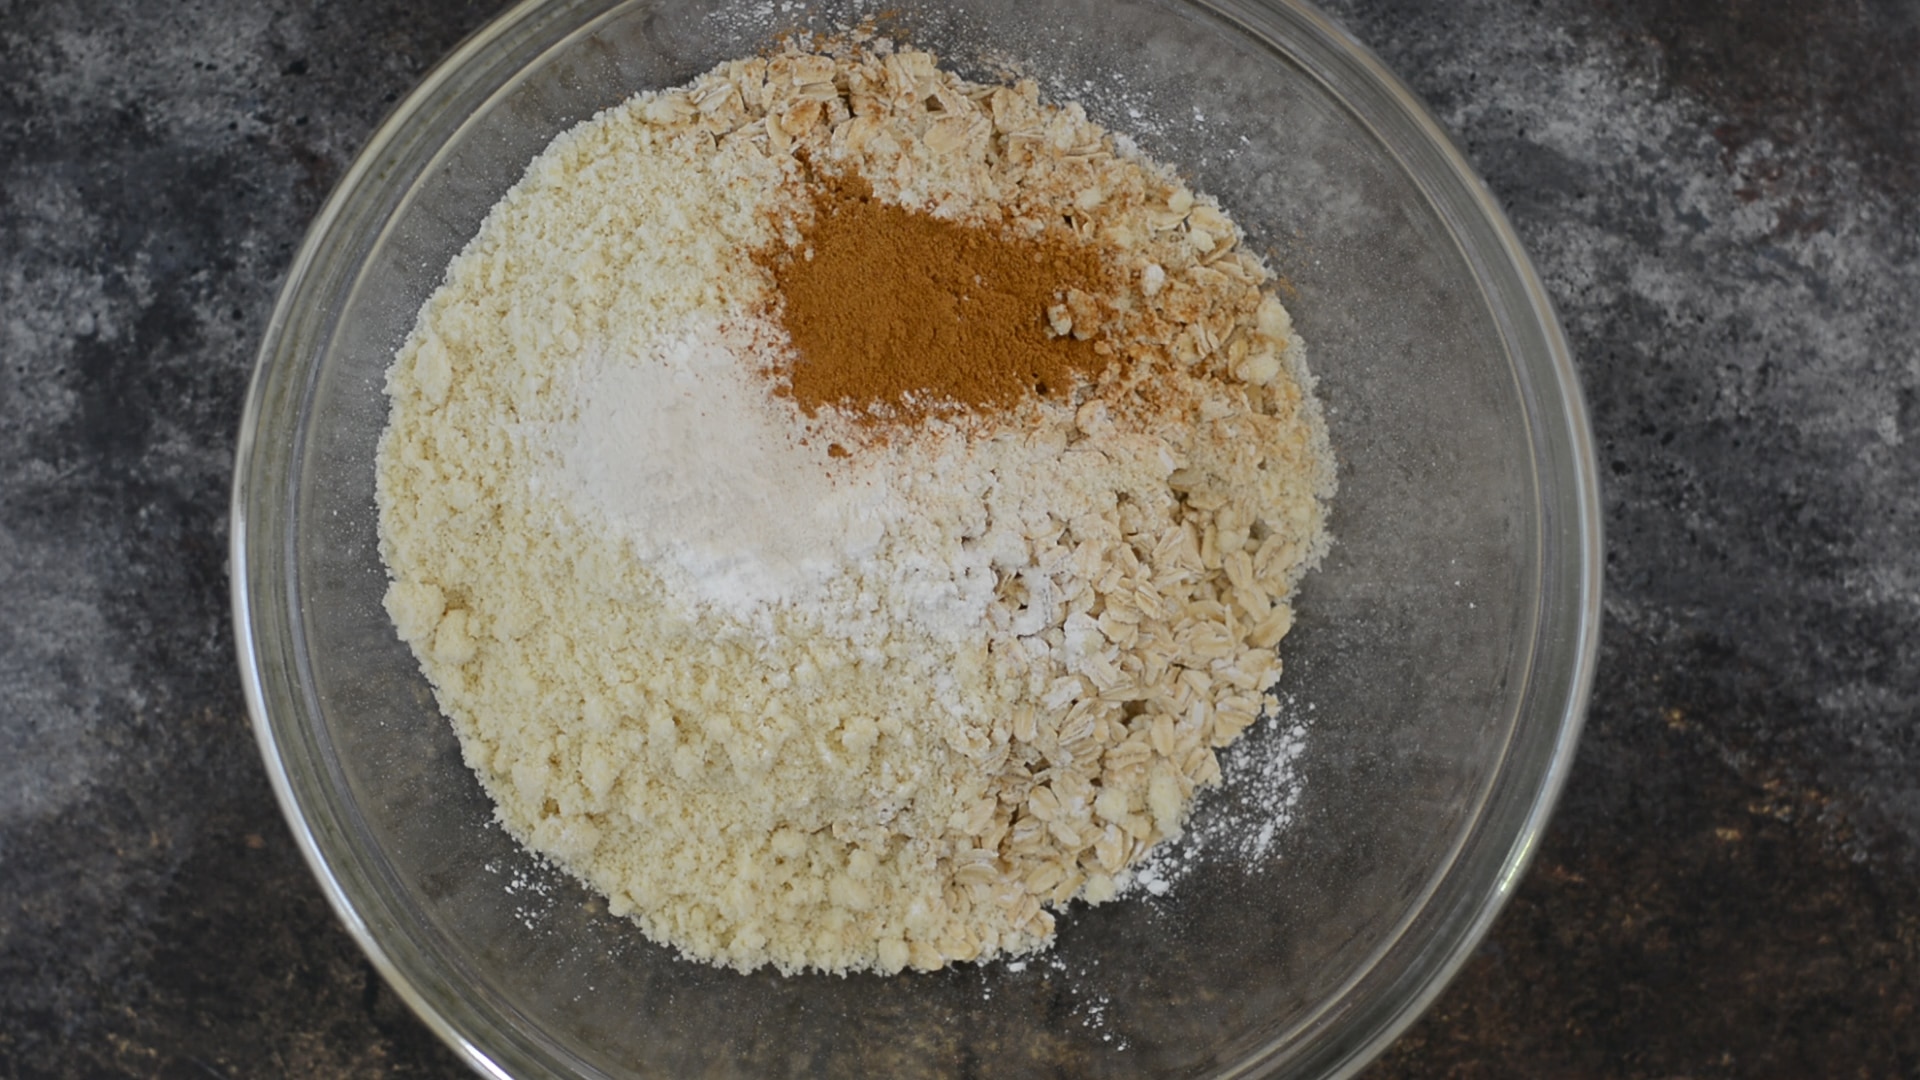 The oatmeal muffins dry ingredients in a glass mixing bowl.